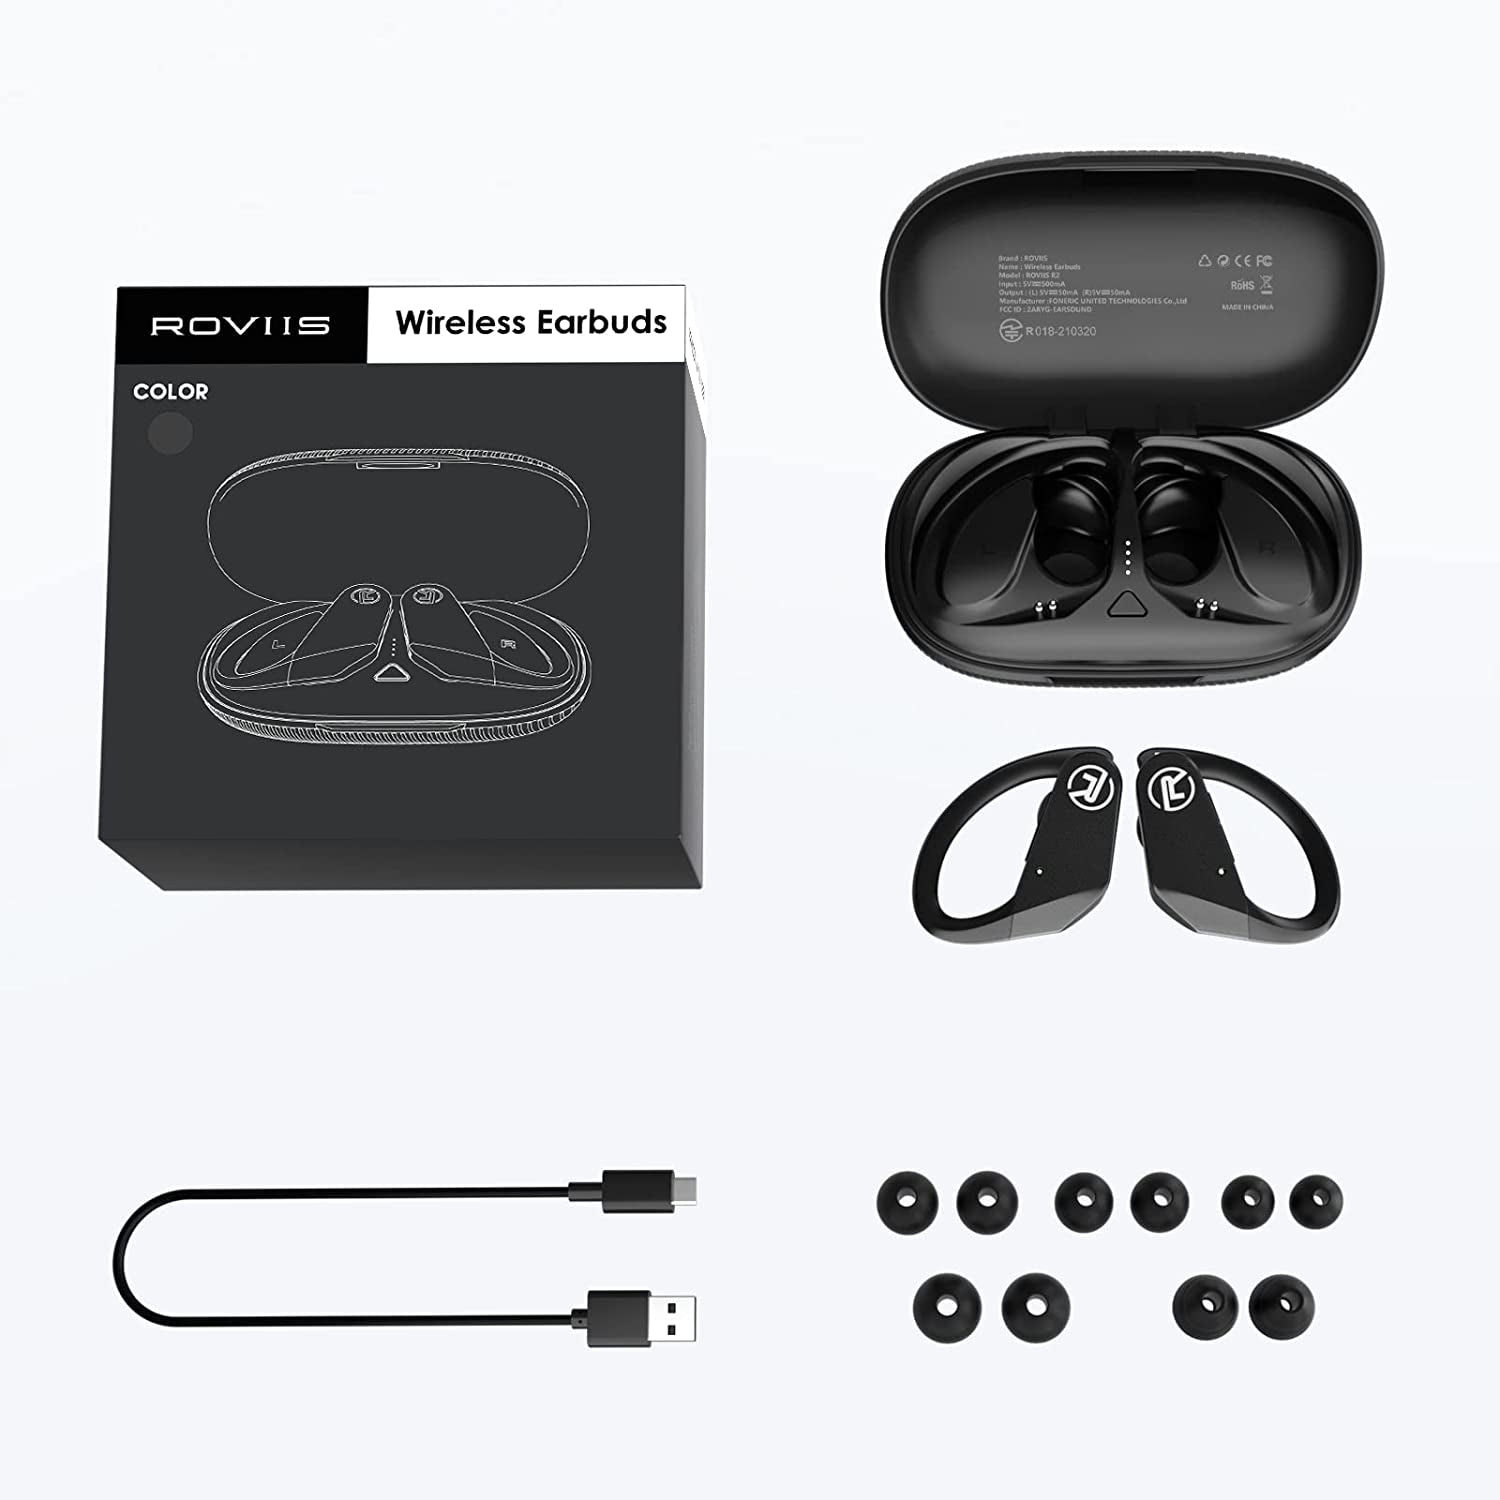 Wireless Earbuds Bluetooth 5.3 Earphones IPX7 Sport Earbuds for Running Workout Bass Stereo Headphones with Ear Hook Microphones over Ear Earbuds for iPhone Android, Fast Pair